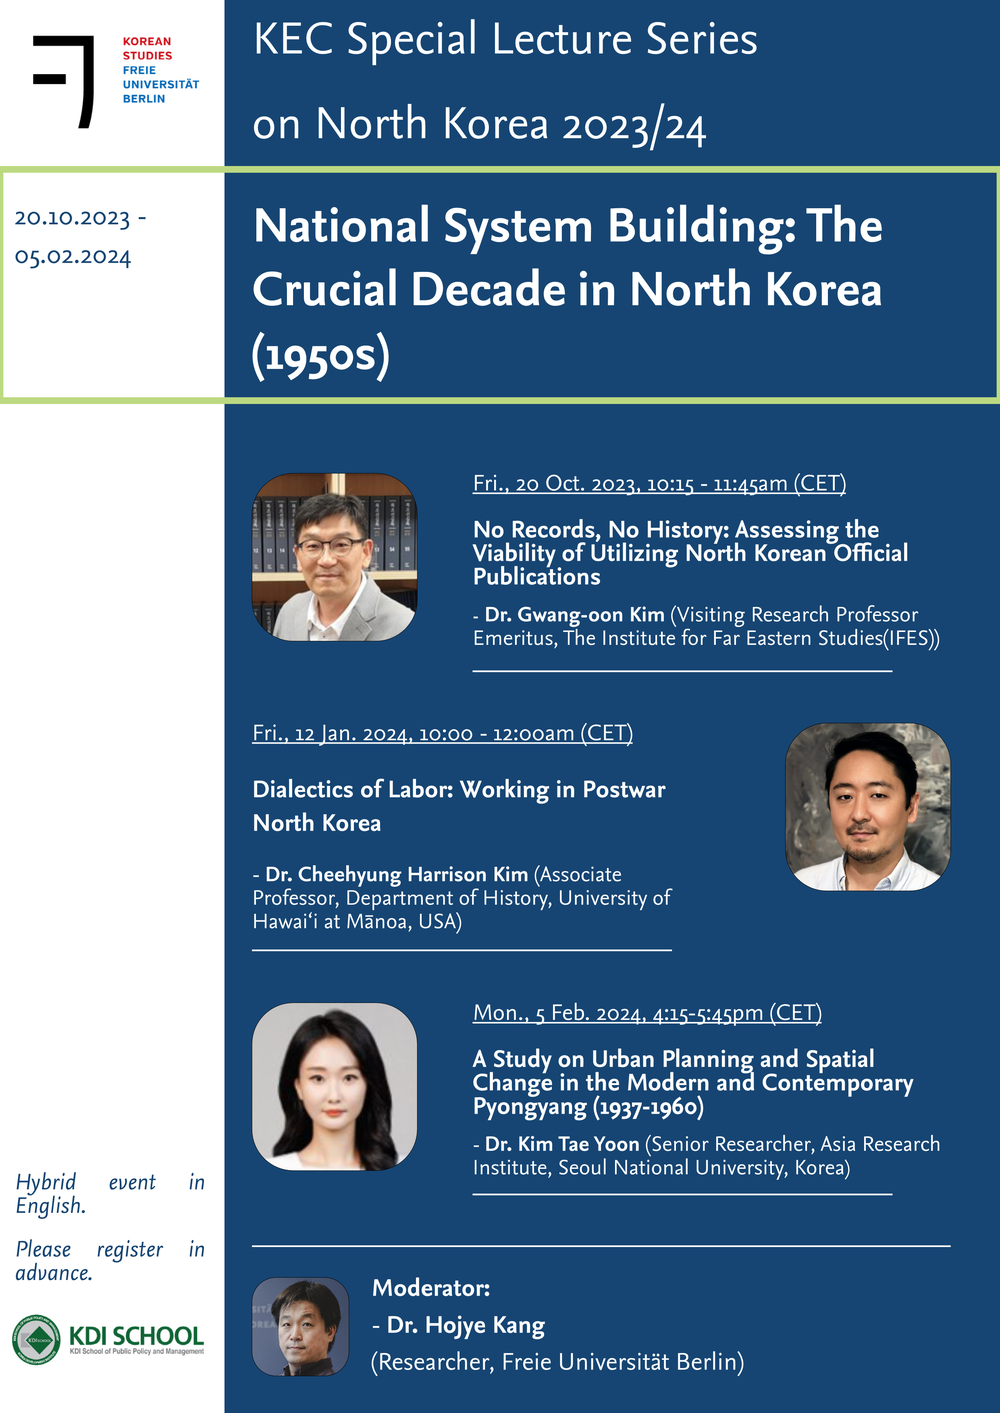 KEC Special Lecture Series on North Korea 2023/24 -National System Building: The Crucial Decade in North Korea (1950s)